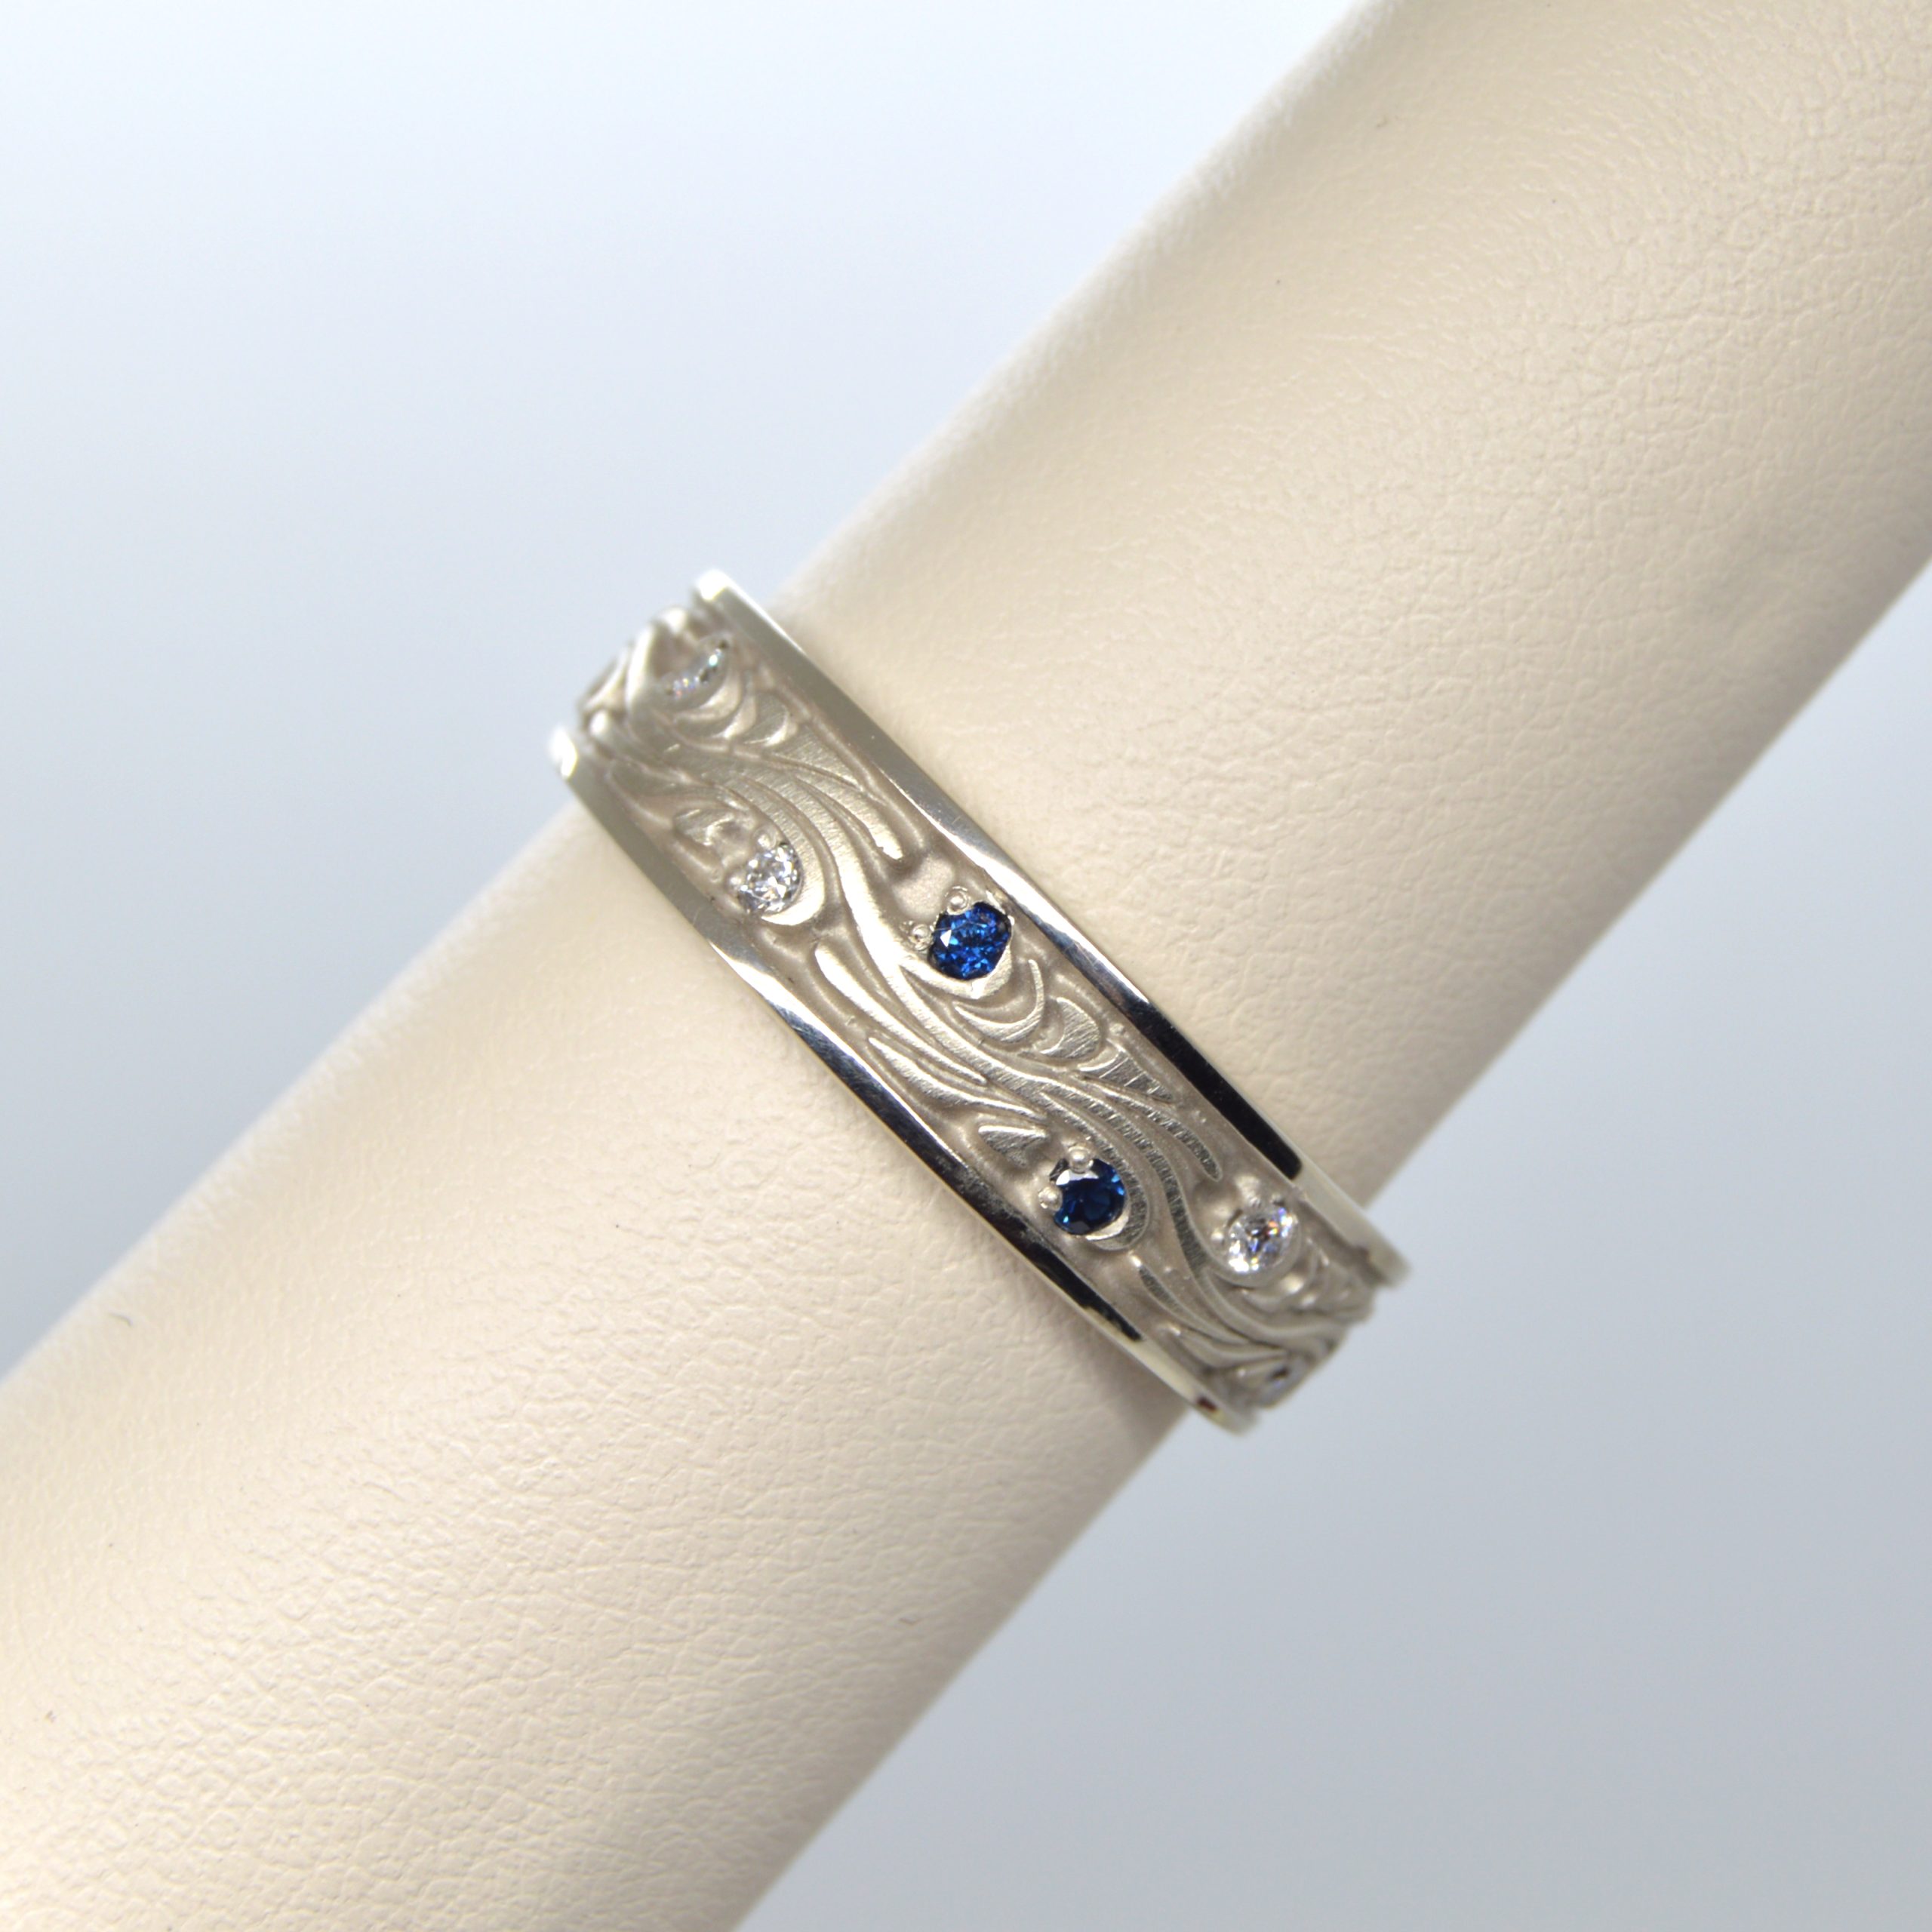 Unique men's wedding band with diamonds and sapphires in Van Gogh's Starry Night design 14K white gold